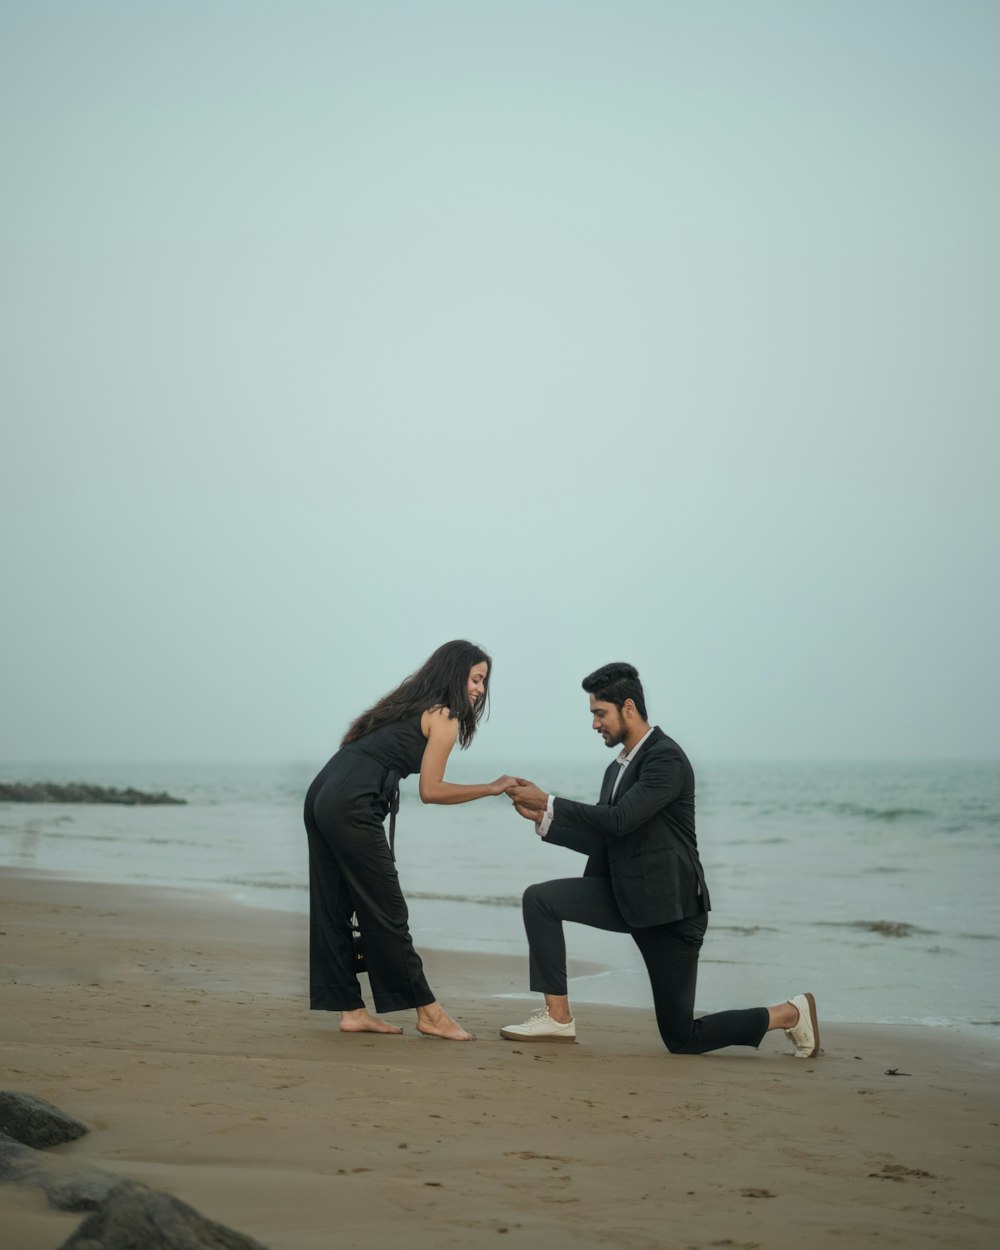 a man kneeling down next to a woman on a beach